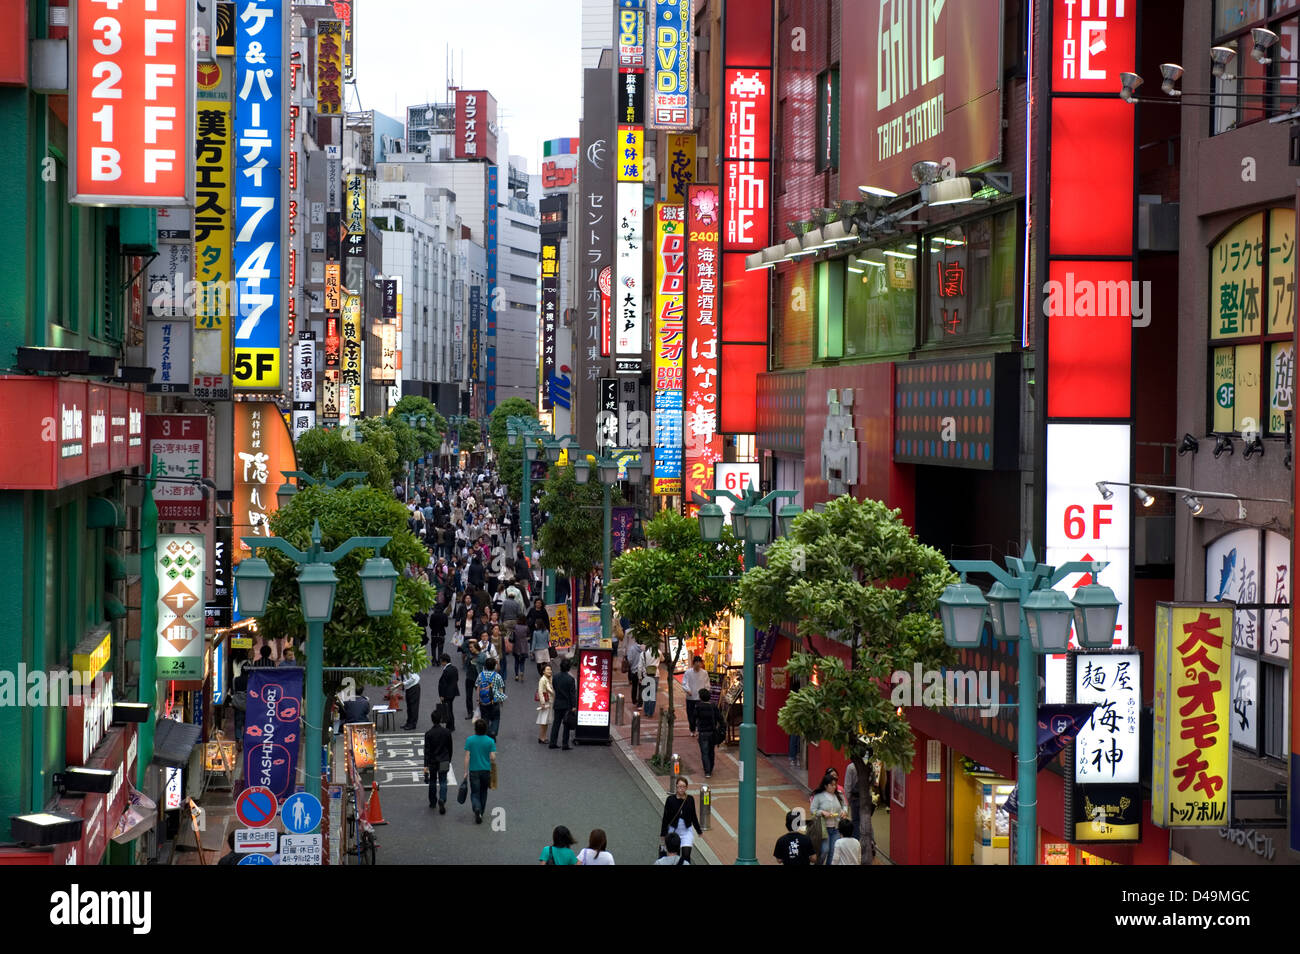 Neon advertising signs cover building facades in the retail and entertainment district of Minami Shinjuku in Tokyo. Stock Photo